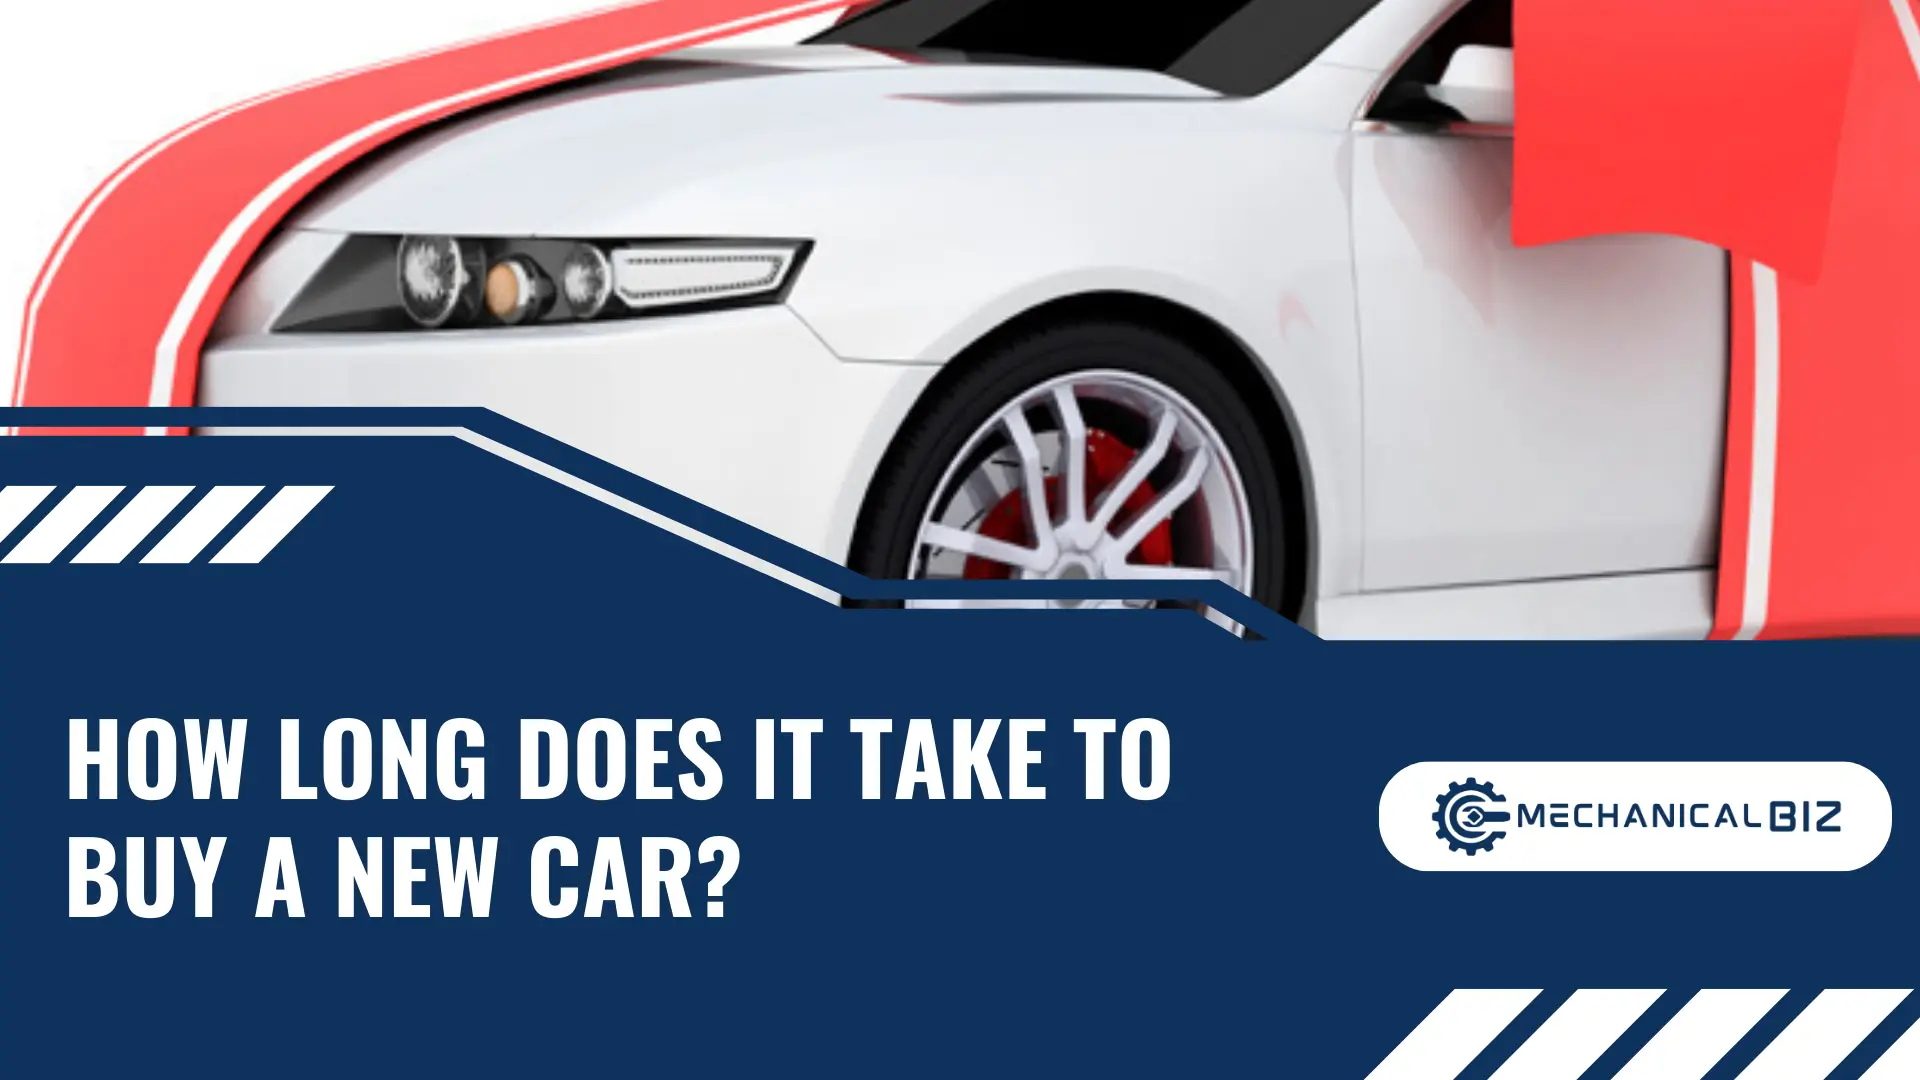 How Long Does It Take to Buy a New Car